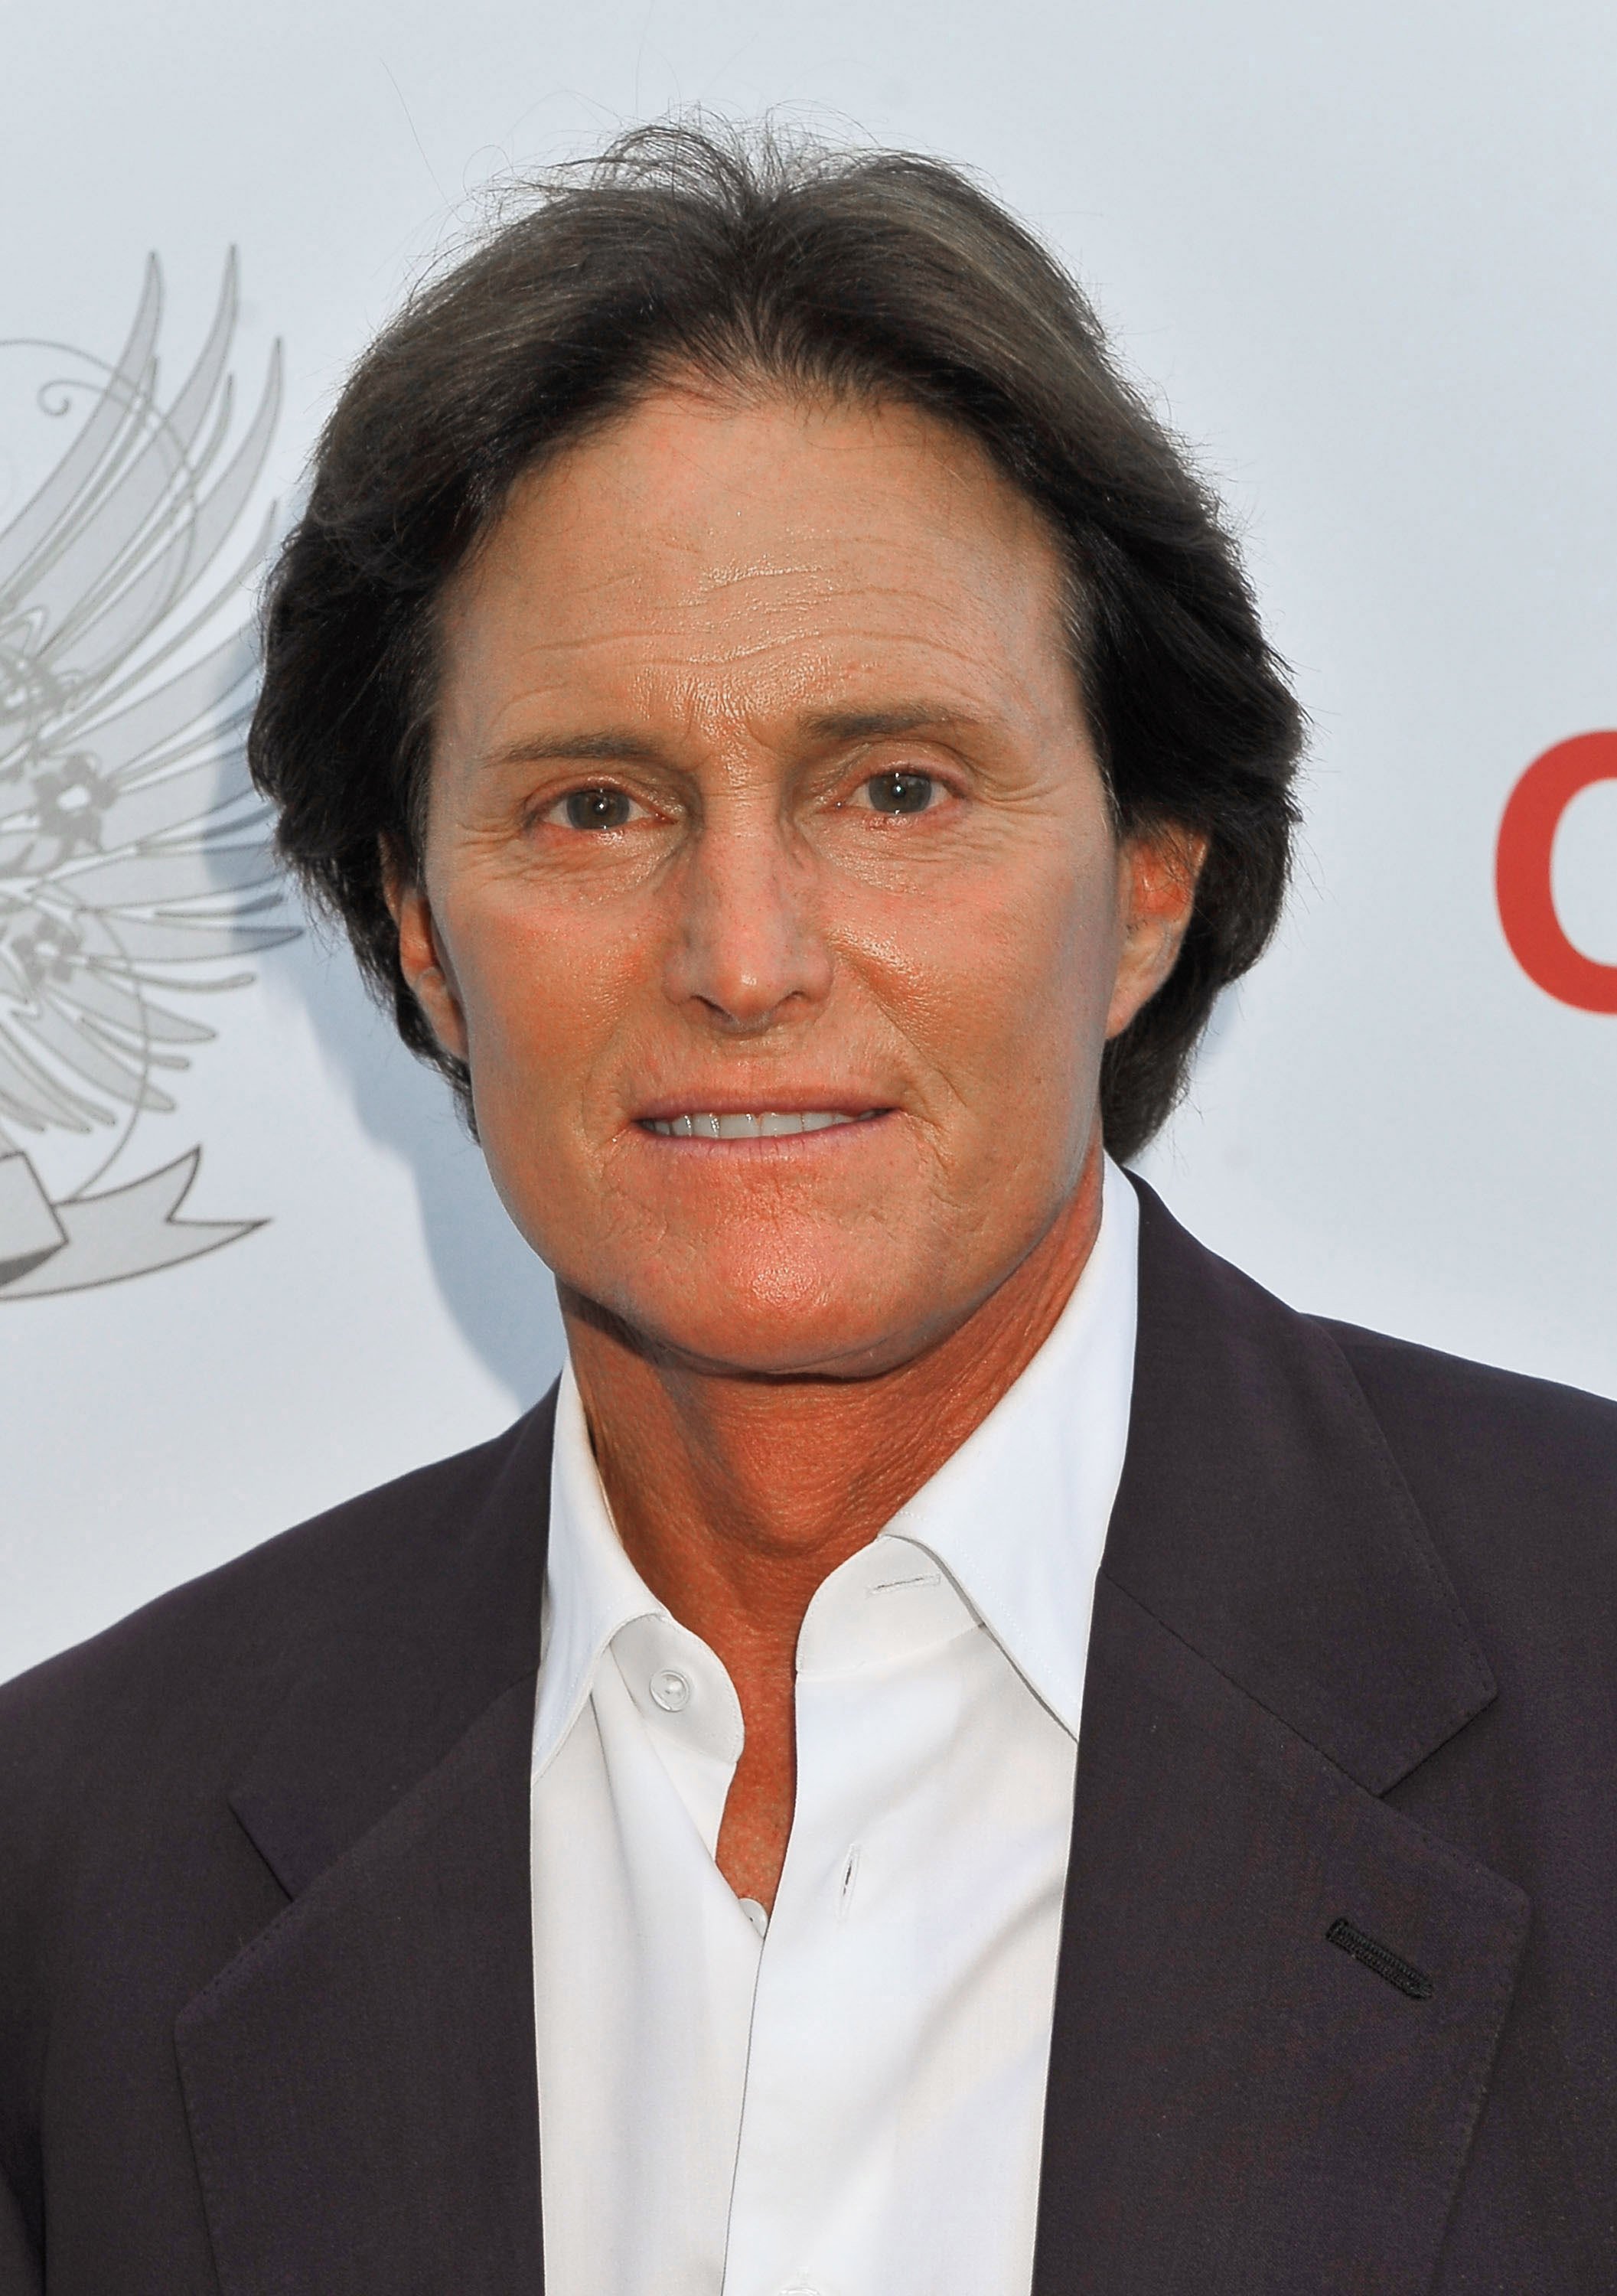  Bruce Jenner arrives at the Aces & Angels Celebrity Poker Party at The Playboy Mansion on July 11, 2009 | Photo: GettyImages